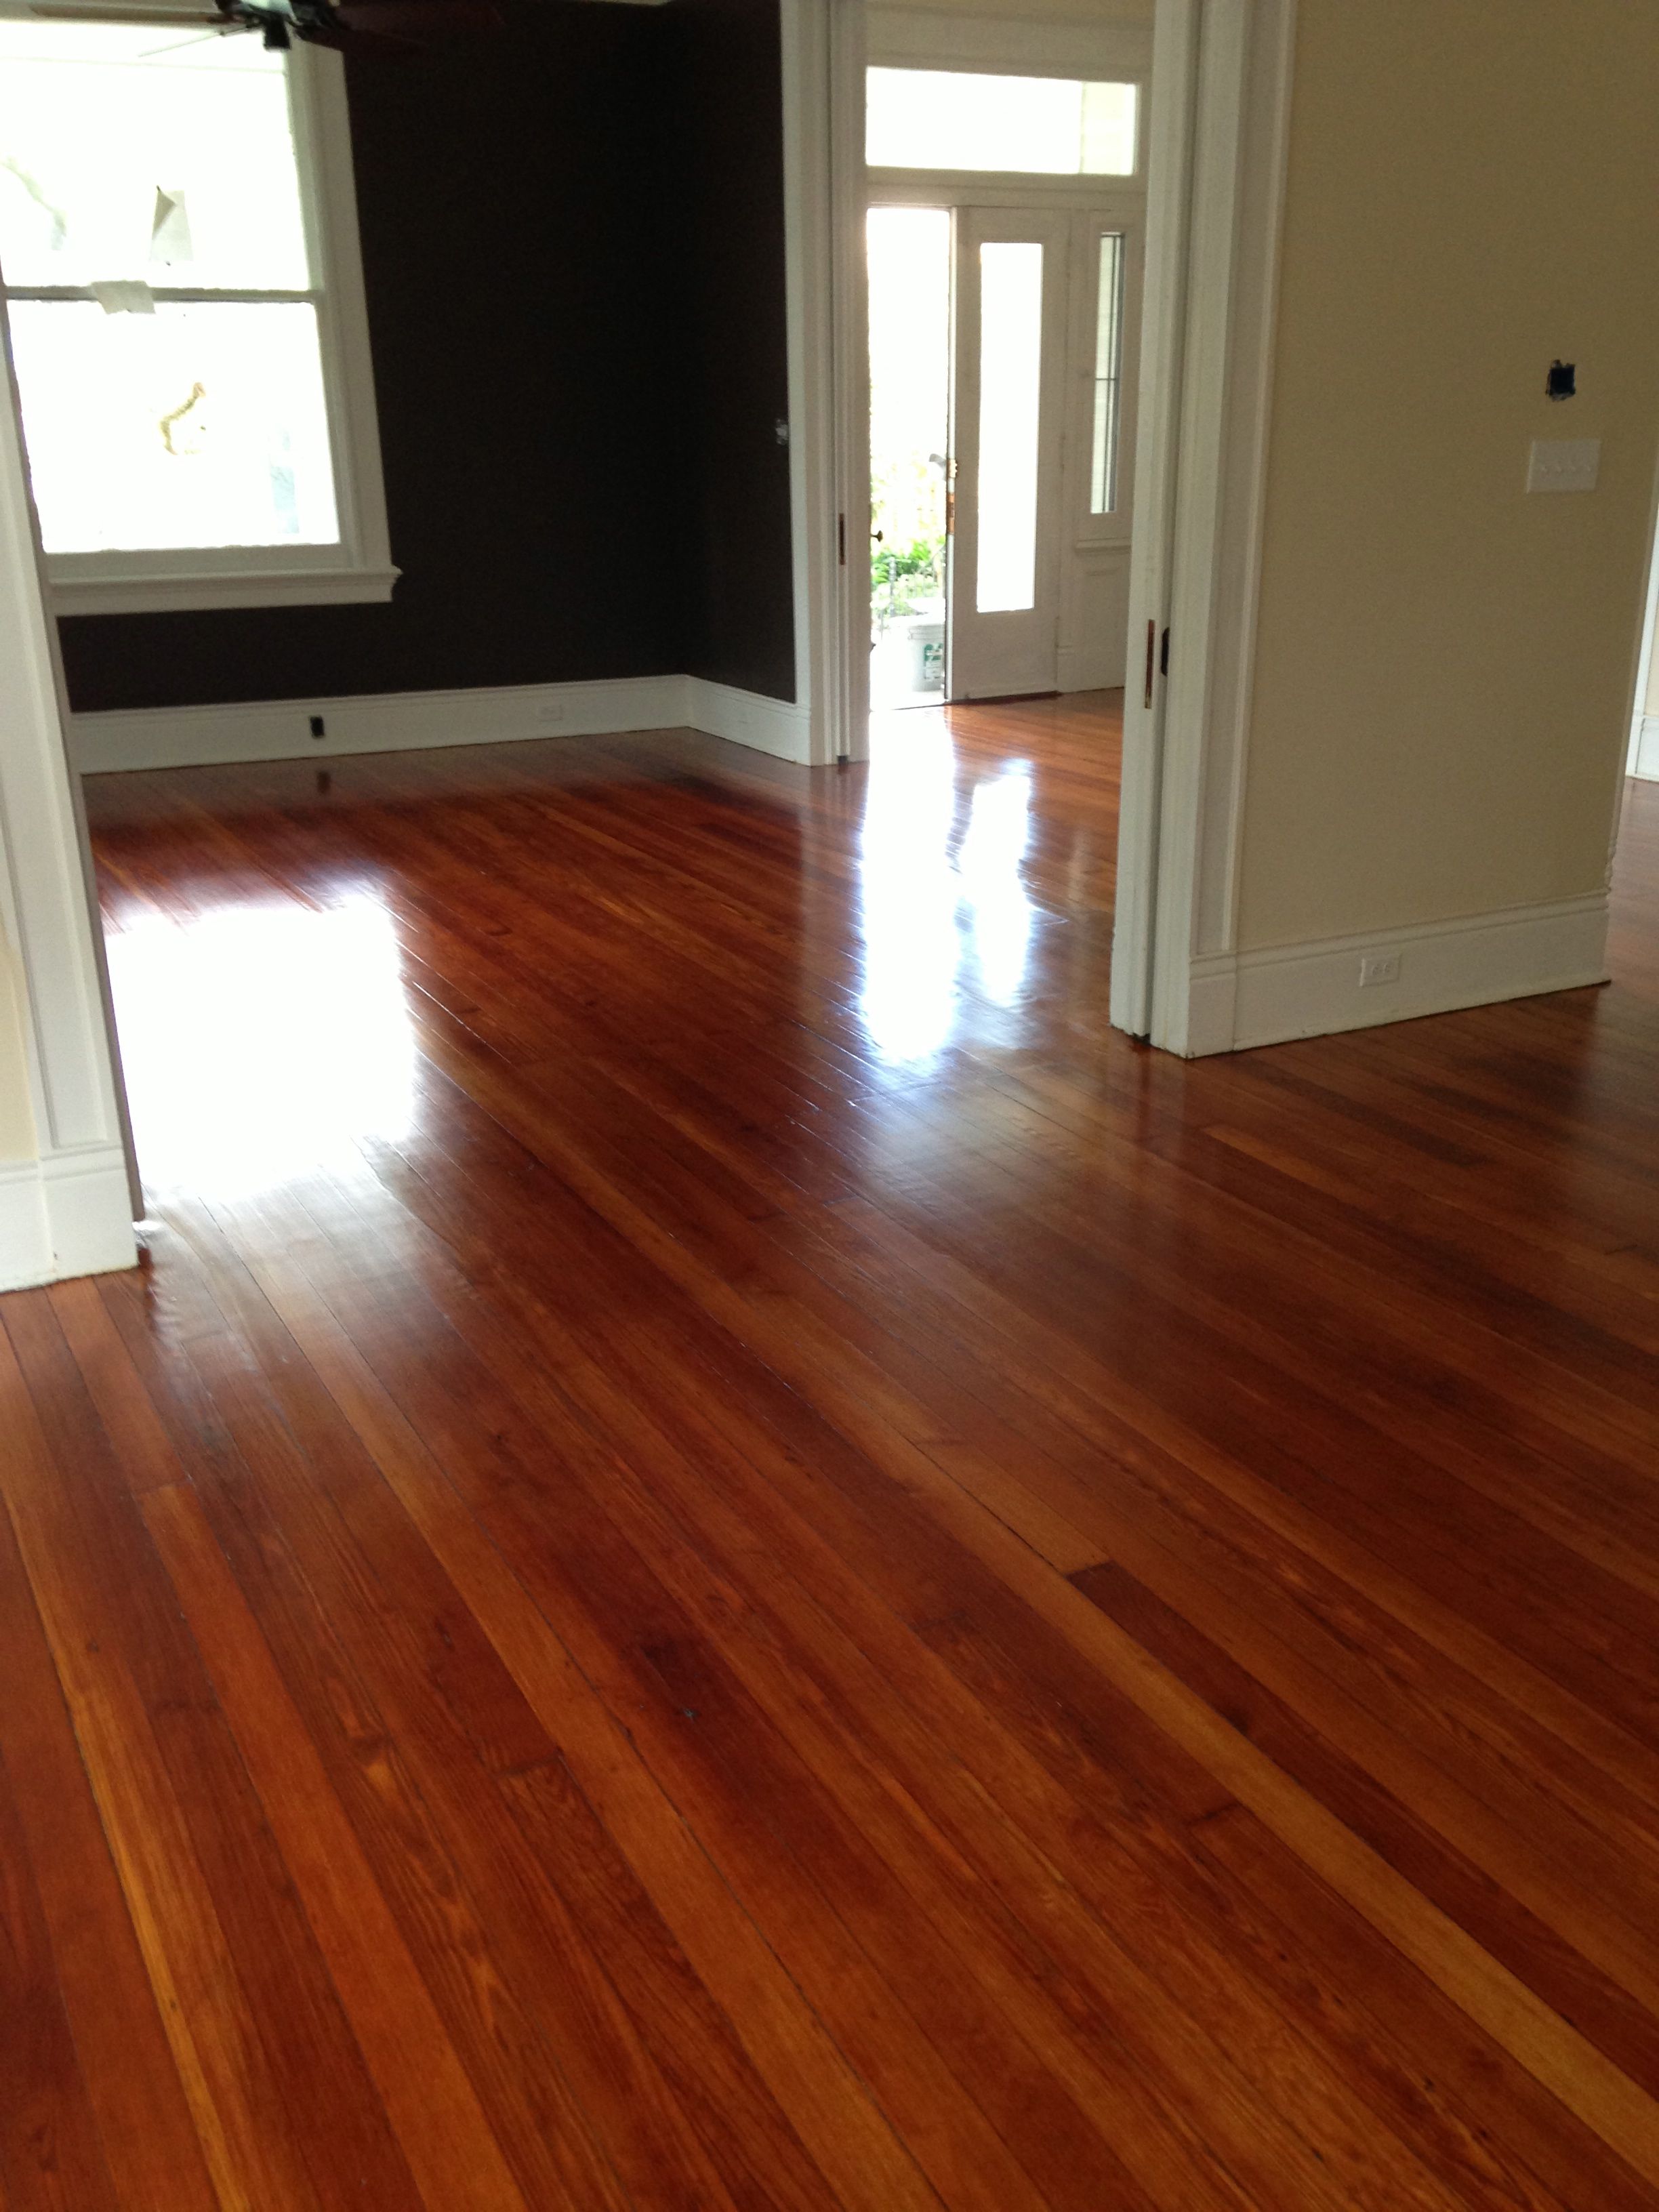 Shiny refinished hardwood flooring in front room and living area.